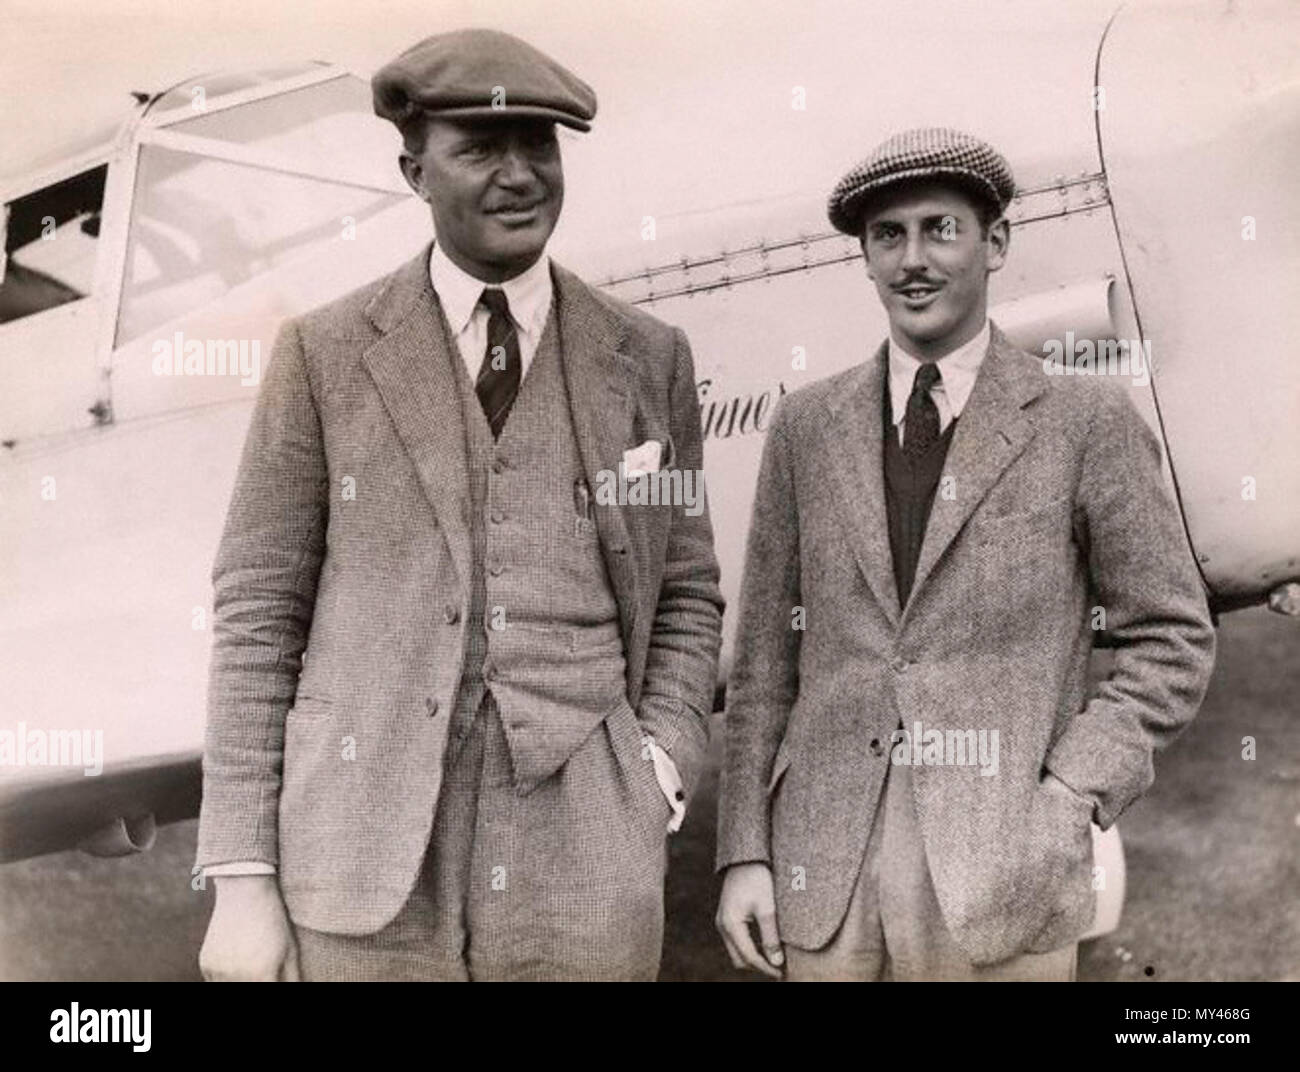 . English: C.W.A. Scott and Giles Guthrie, standing in front of the Percival Vega Gull G-AEKE in which they won the Schlesinger Air Race. September 1936. punlished by Planet News in 1936 unknown author 93 C.W.A. Scott and Guthrie vega gull Stock Photo